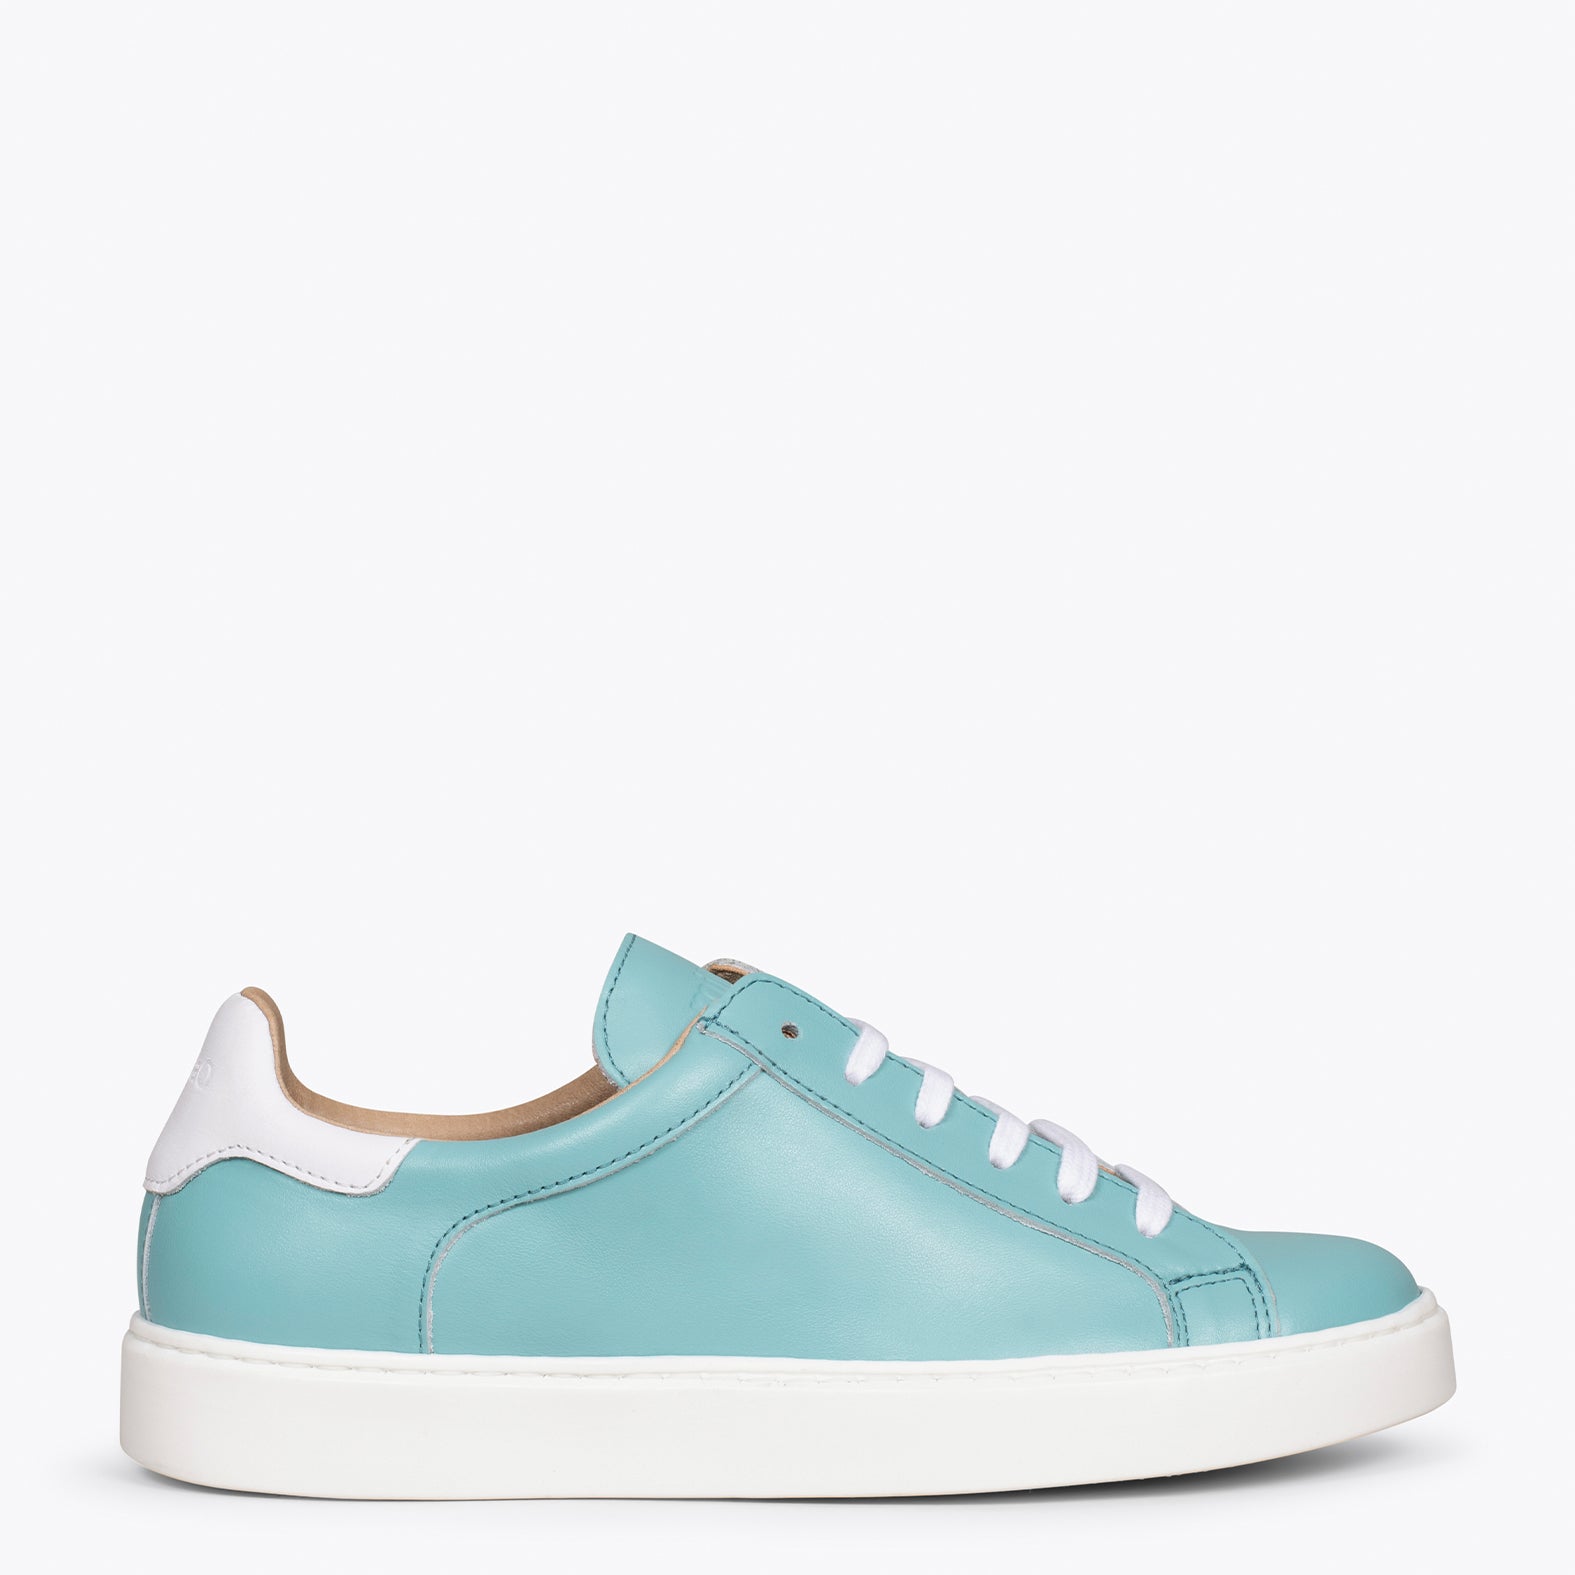 SNEAKER – BLUE sneaker with WHITE detail